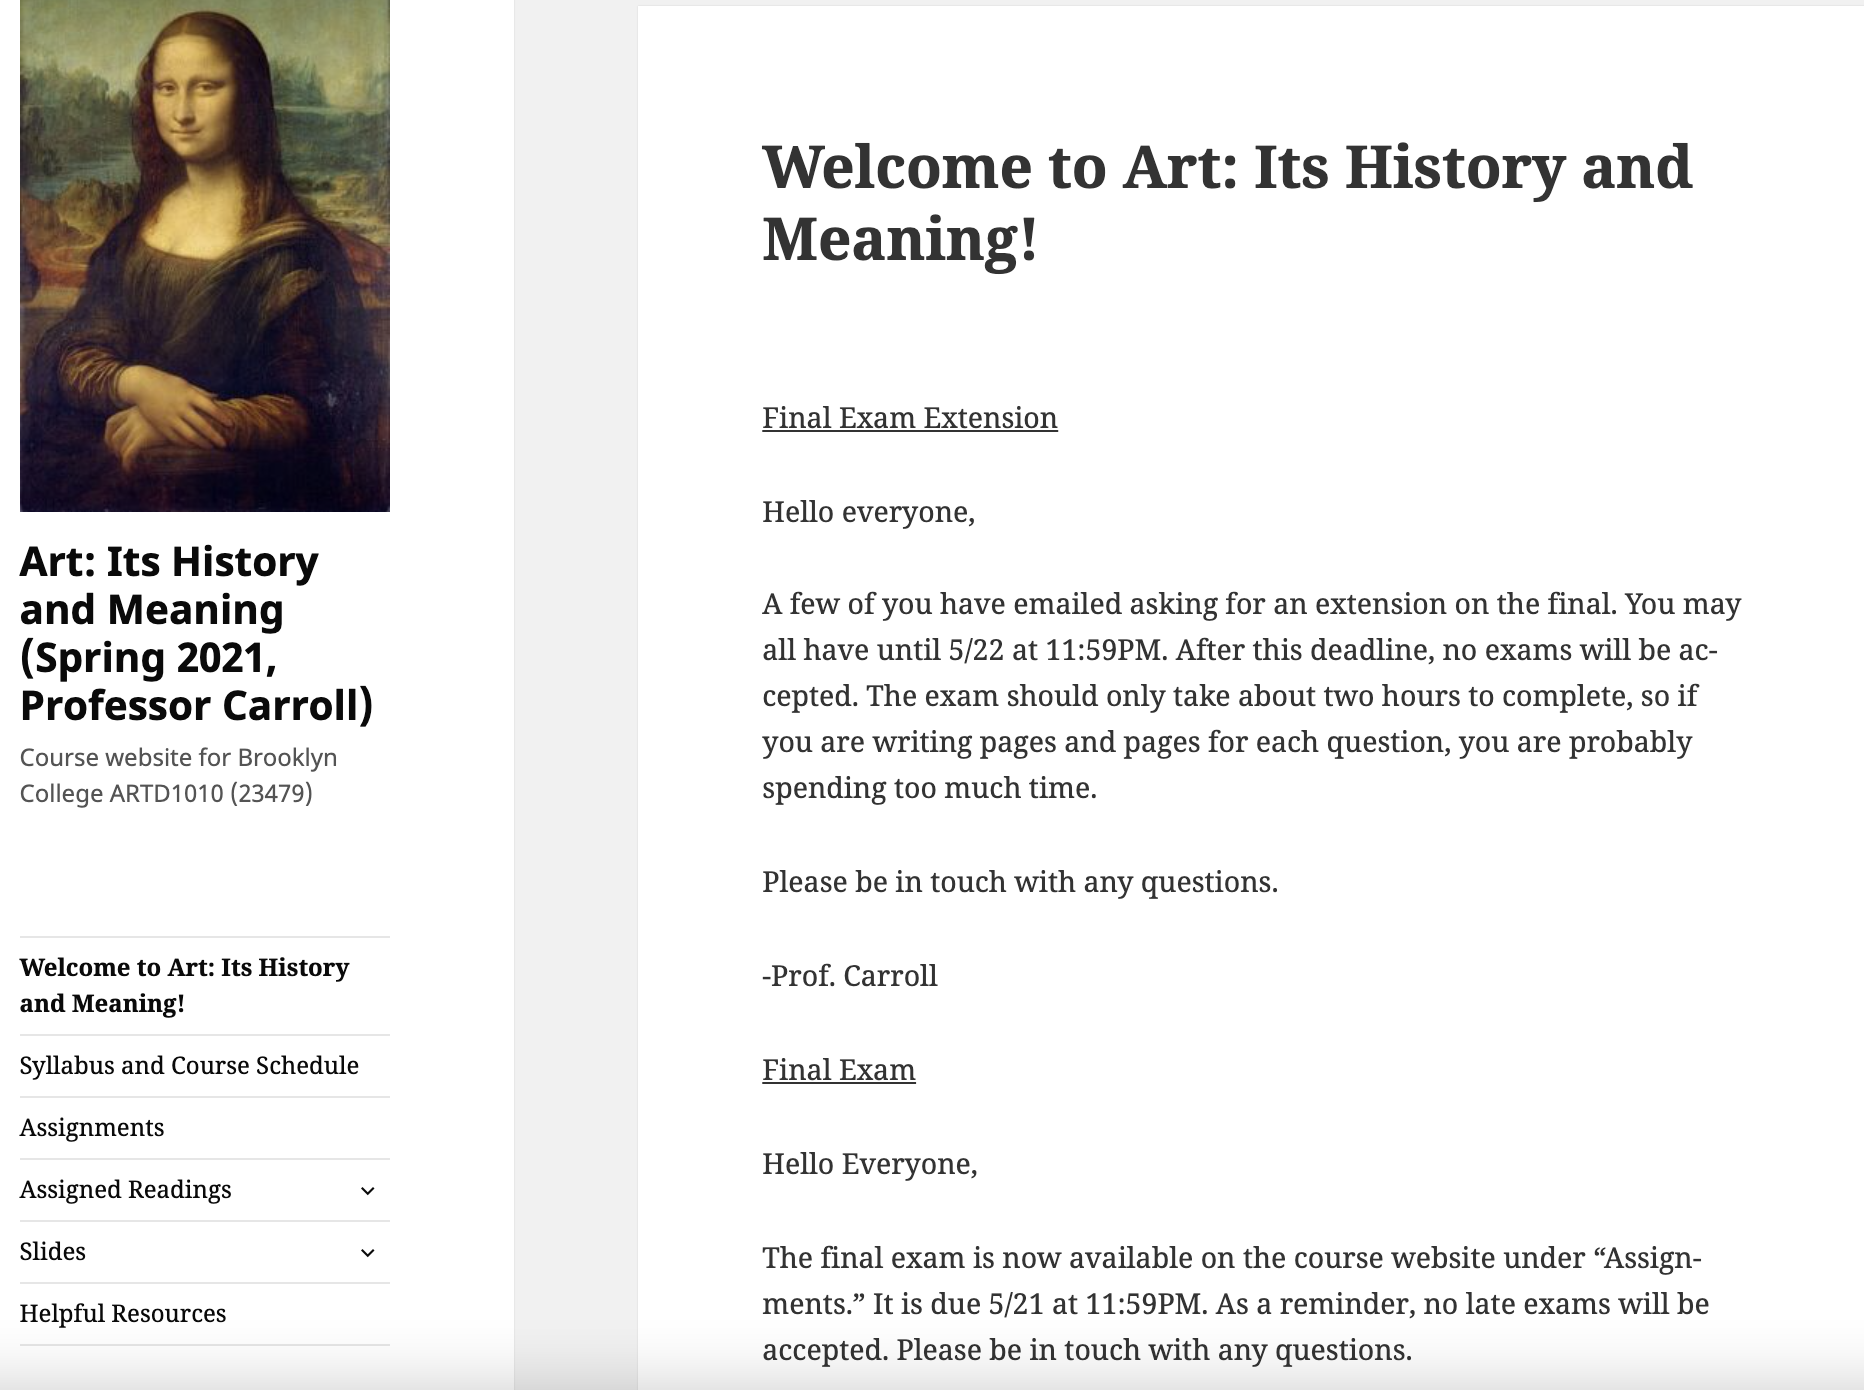 Screenshot of "art history and its meaning" course site